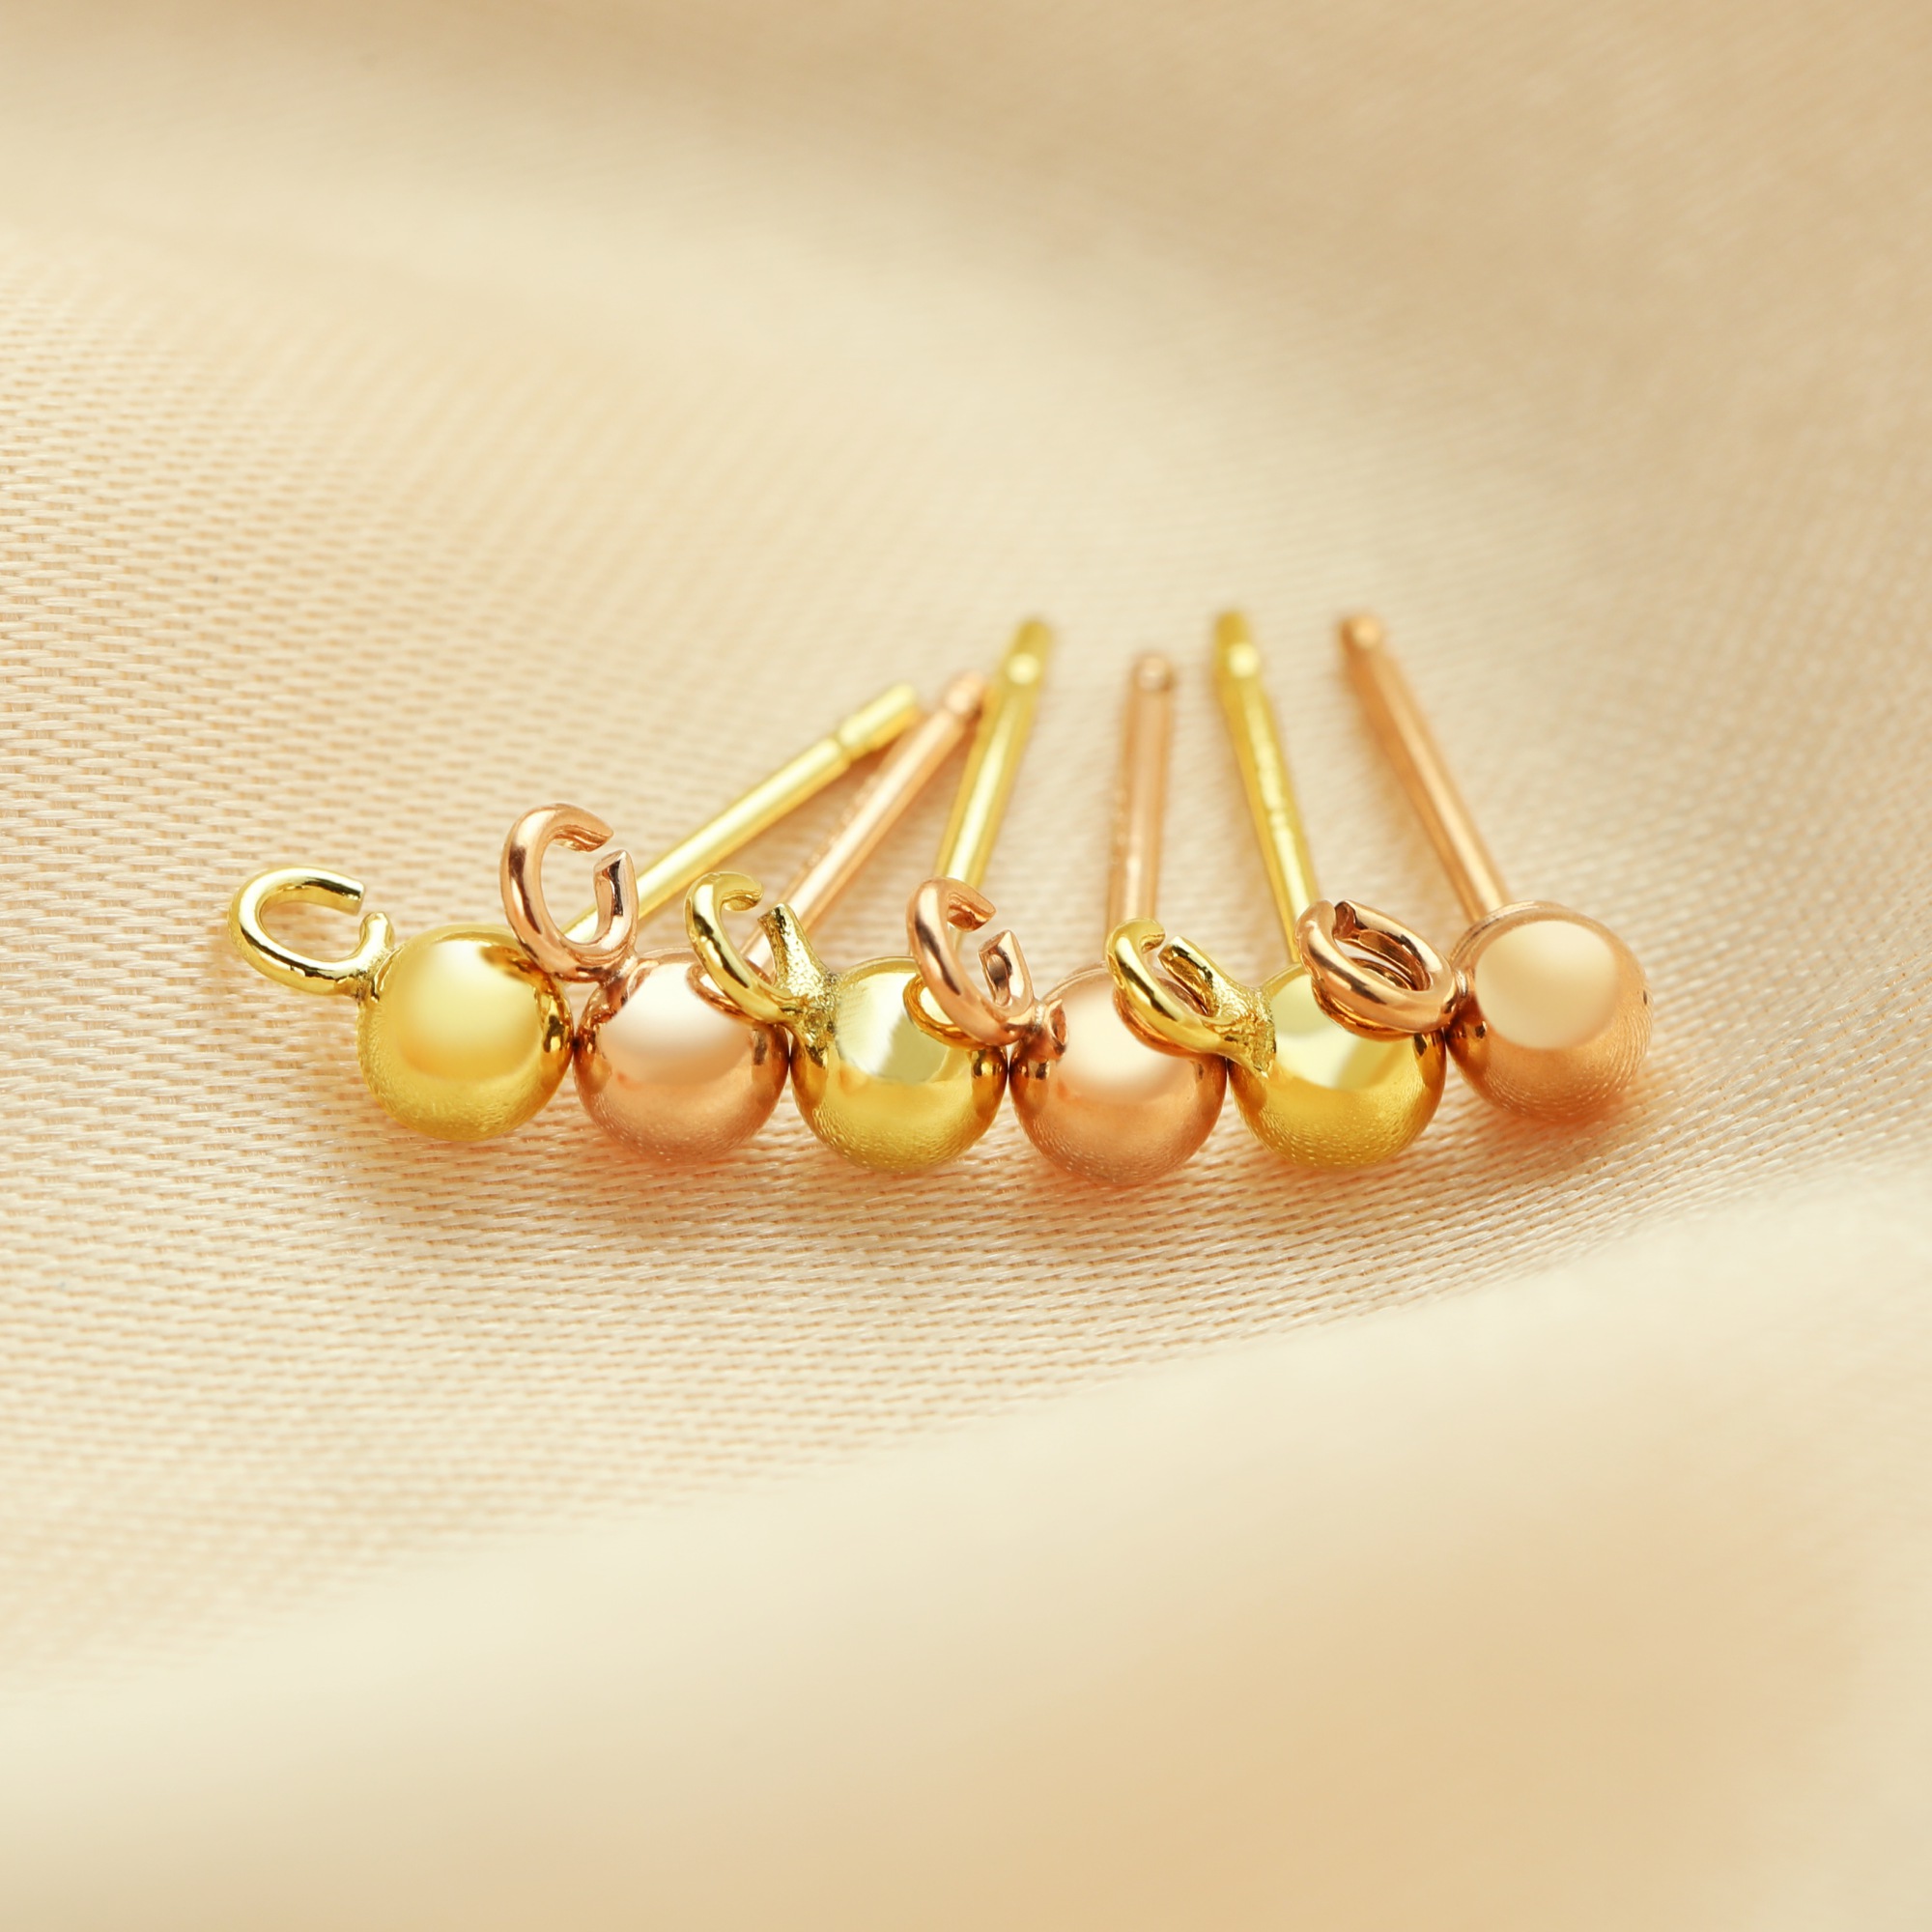 1Pair 2MM Ball Post Studs Earrings with Open Loop,14k Gold Filled Ball Studs Earringss,Minimalist Earringss,DIY Earringss Supplies 1706124 - Click Image to Close